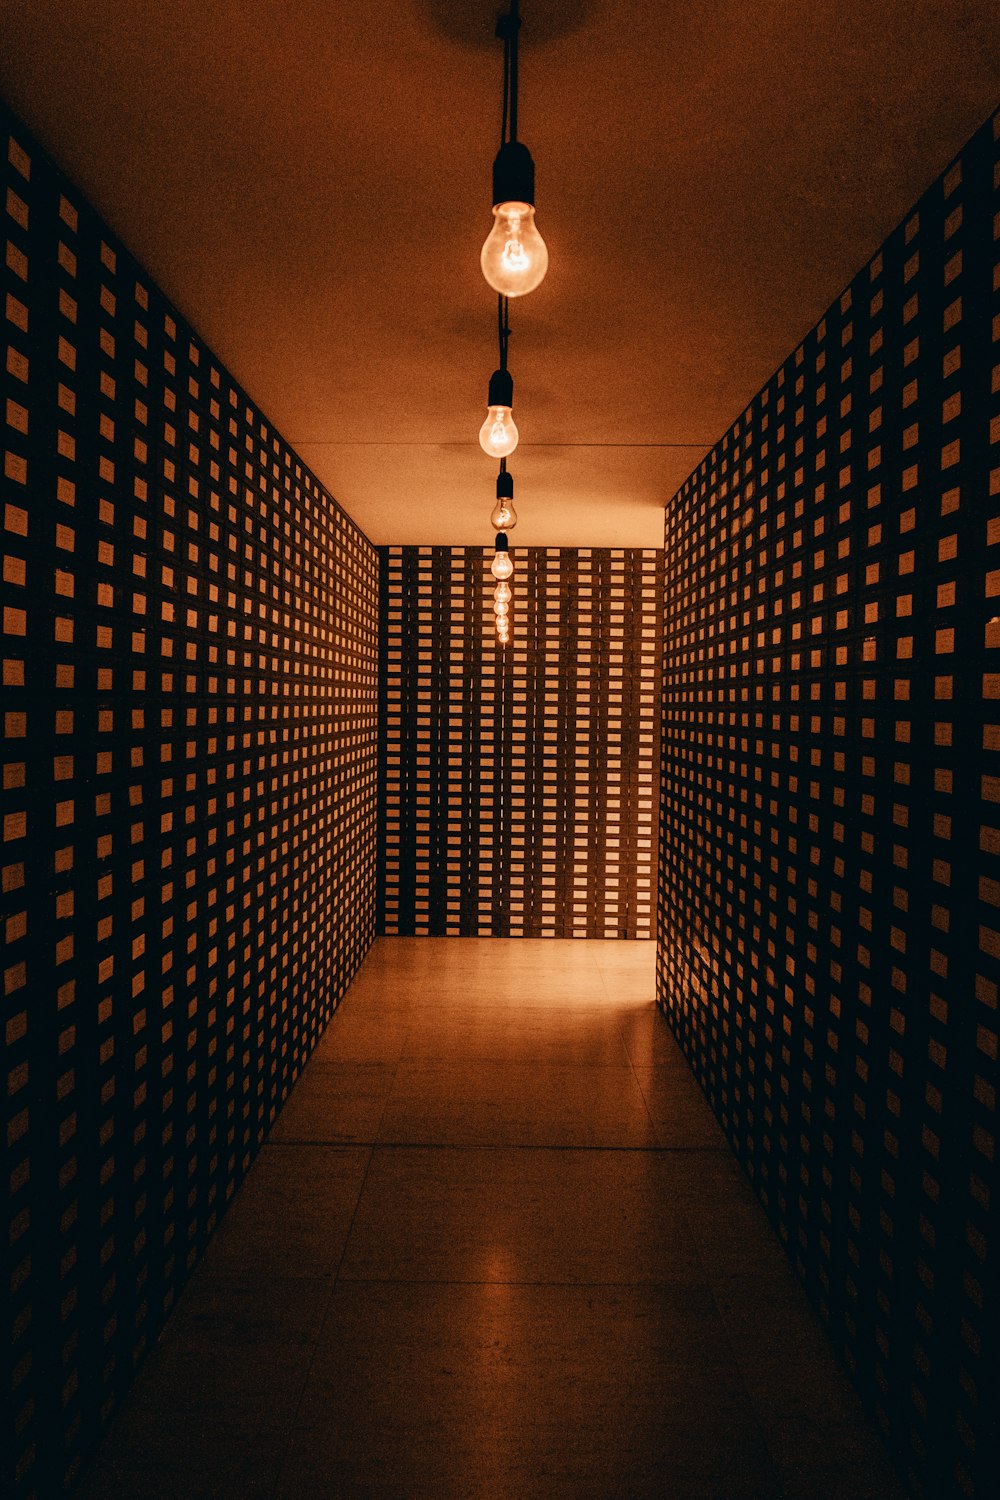 a dimly lit hallway with checkered walls and a light bulb